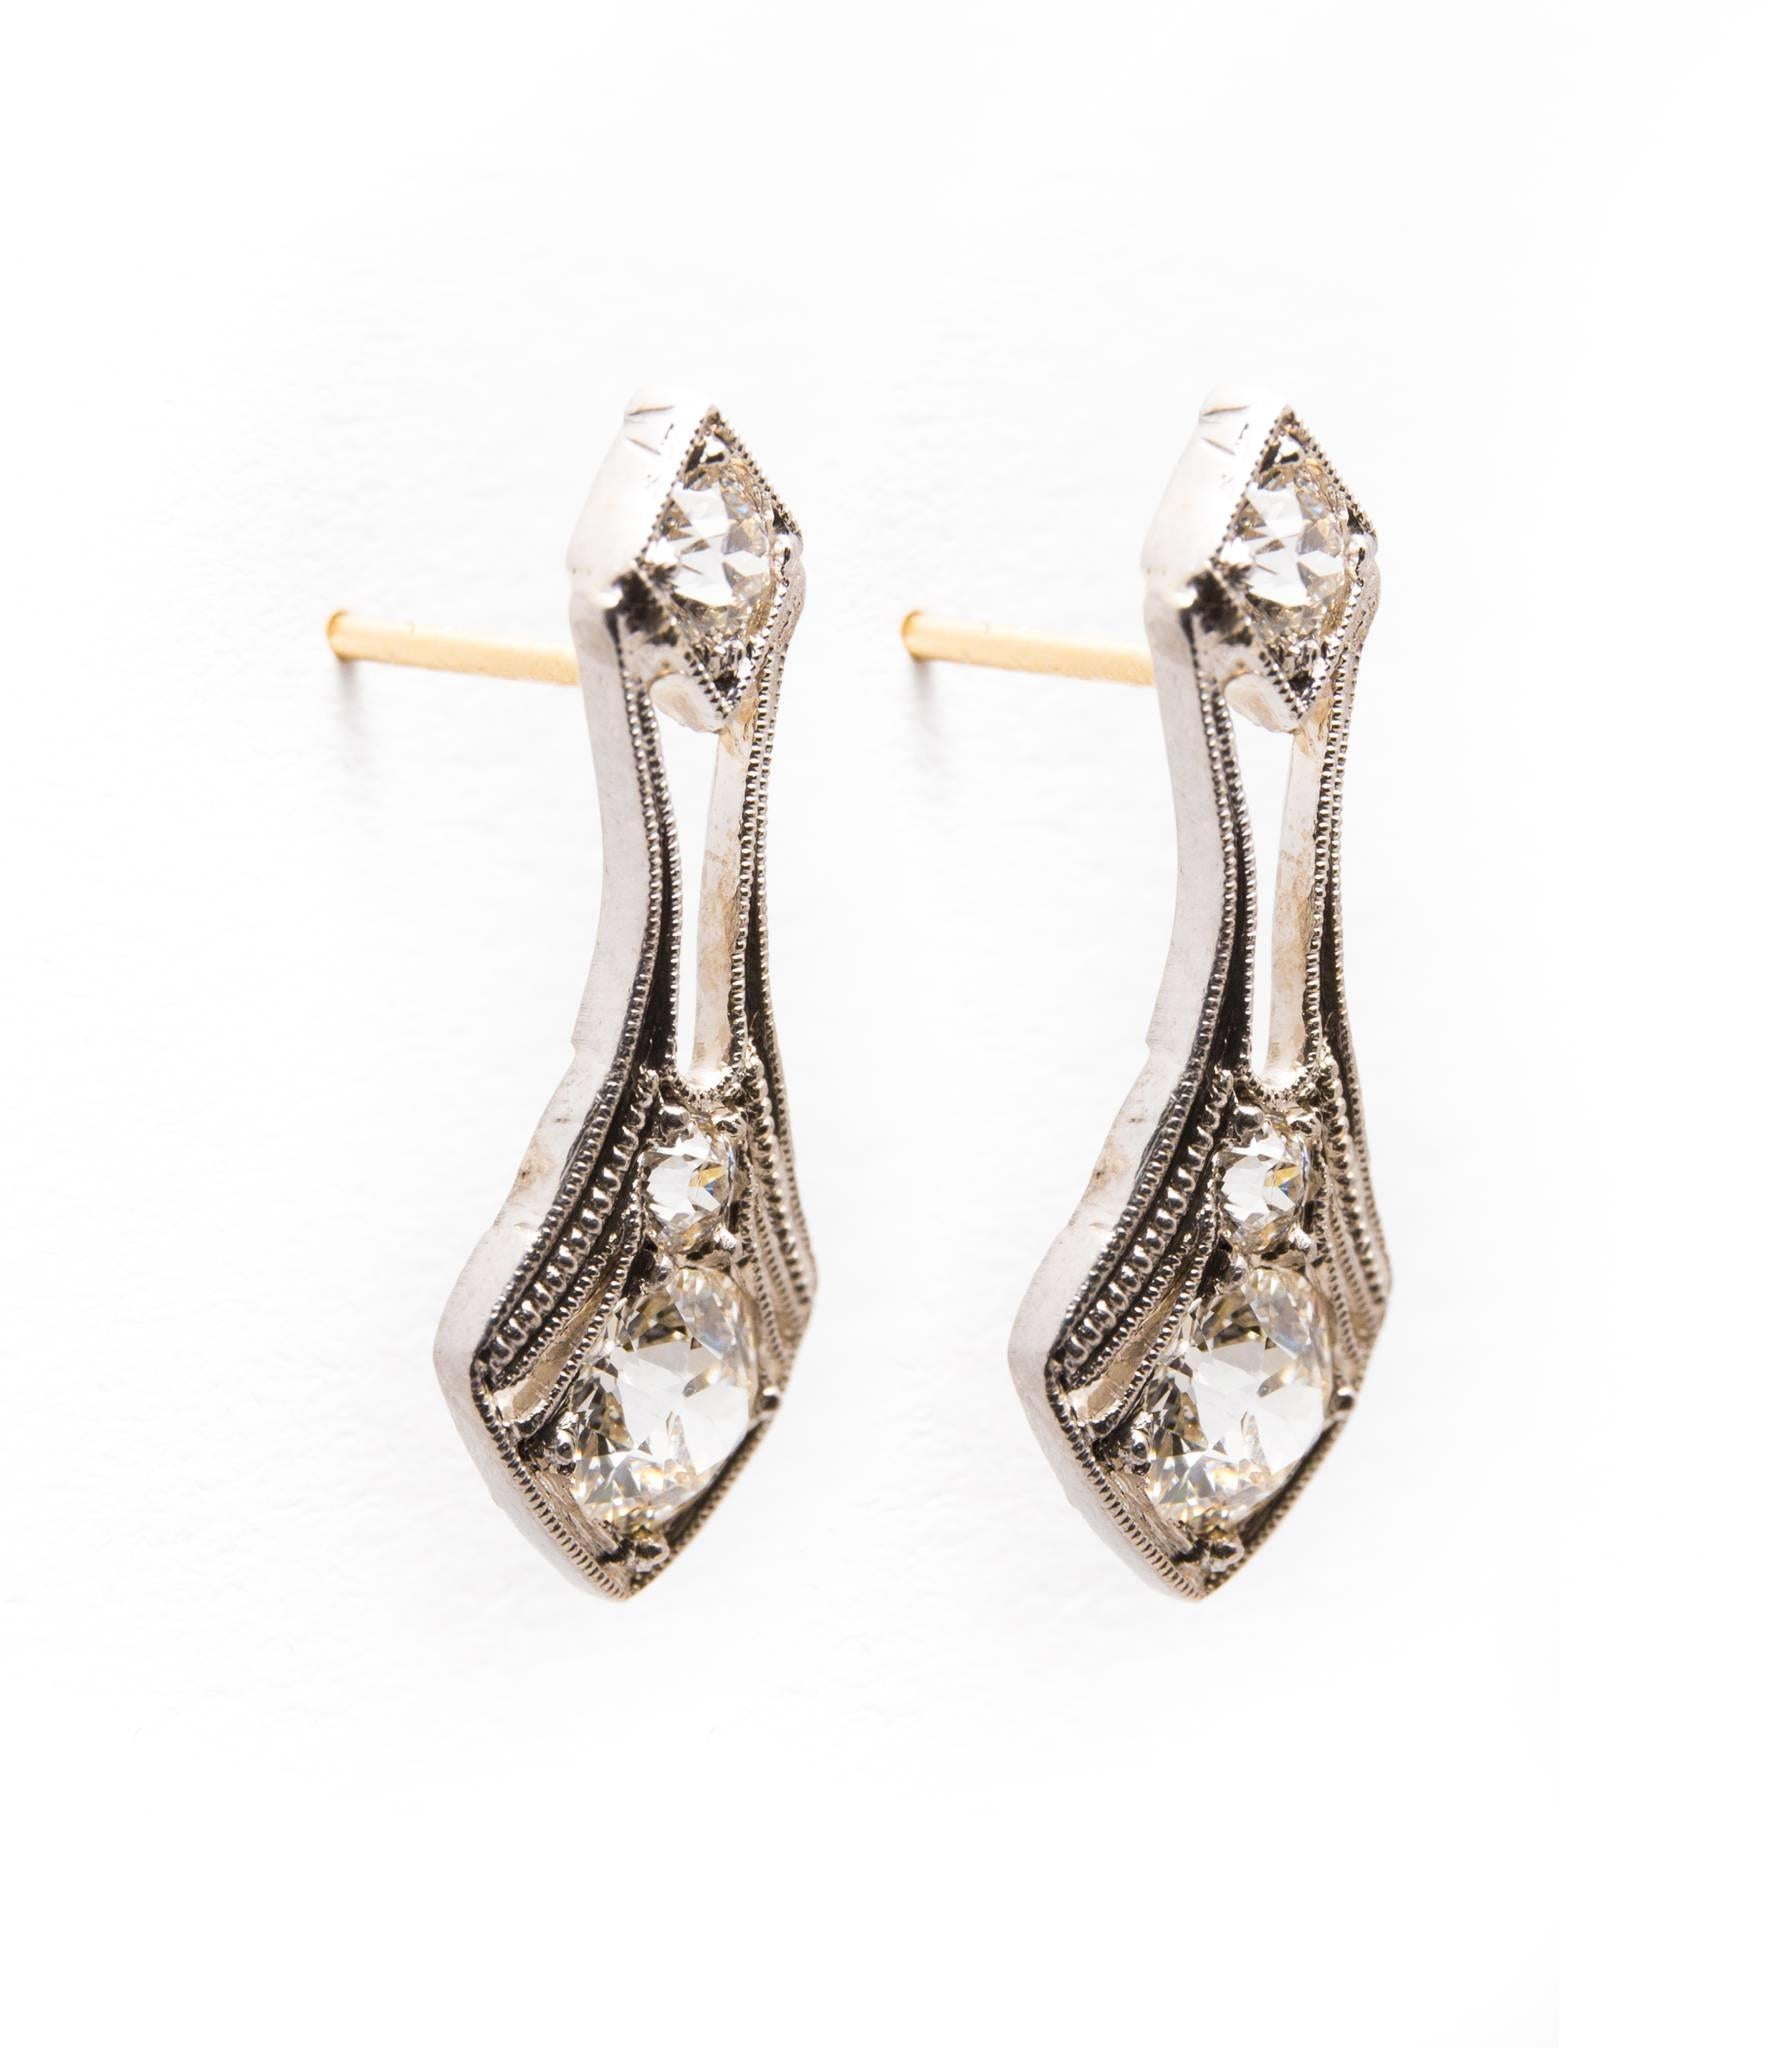 Beacon Hill Jewelers Presents:

A pair of original art deco period diamond earrings in platinum.  Set with a total of six diamonds, these earrings feature beautiful hand crafted platinum mountings with hand applied mille grain beading.

Grading as